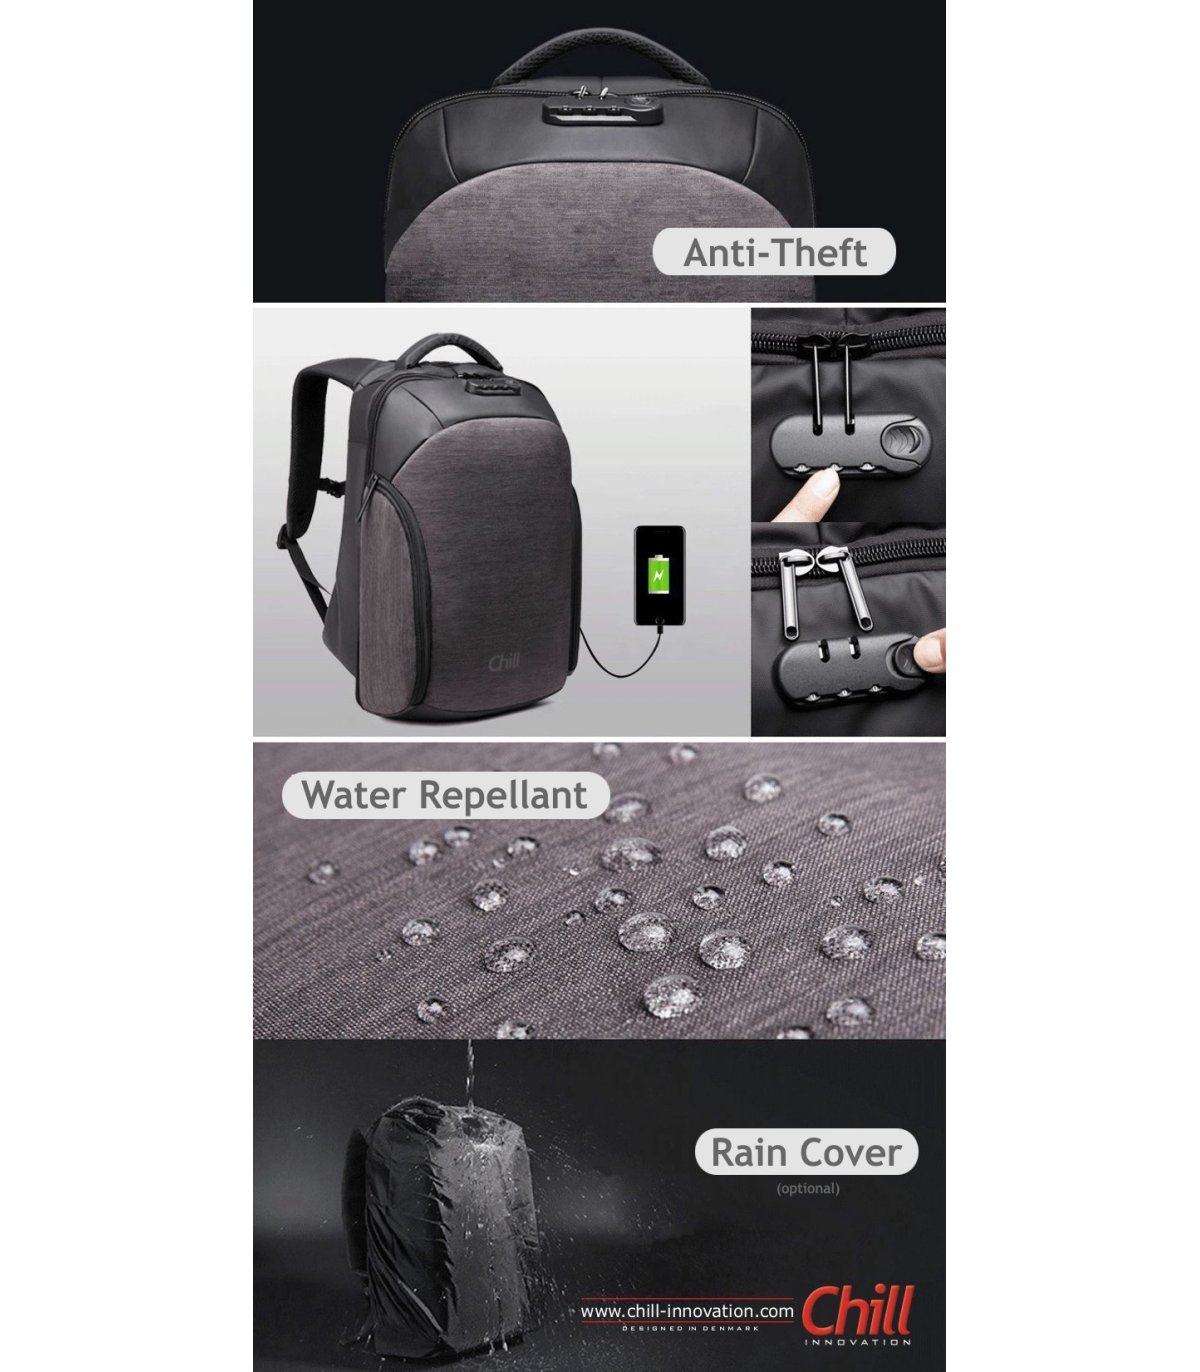 BUNDLE OFFER: Chill Stealth Backpack + Urban Bag + Rain Cover